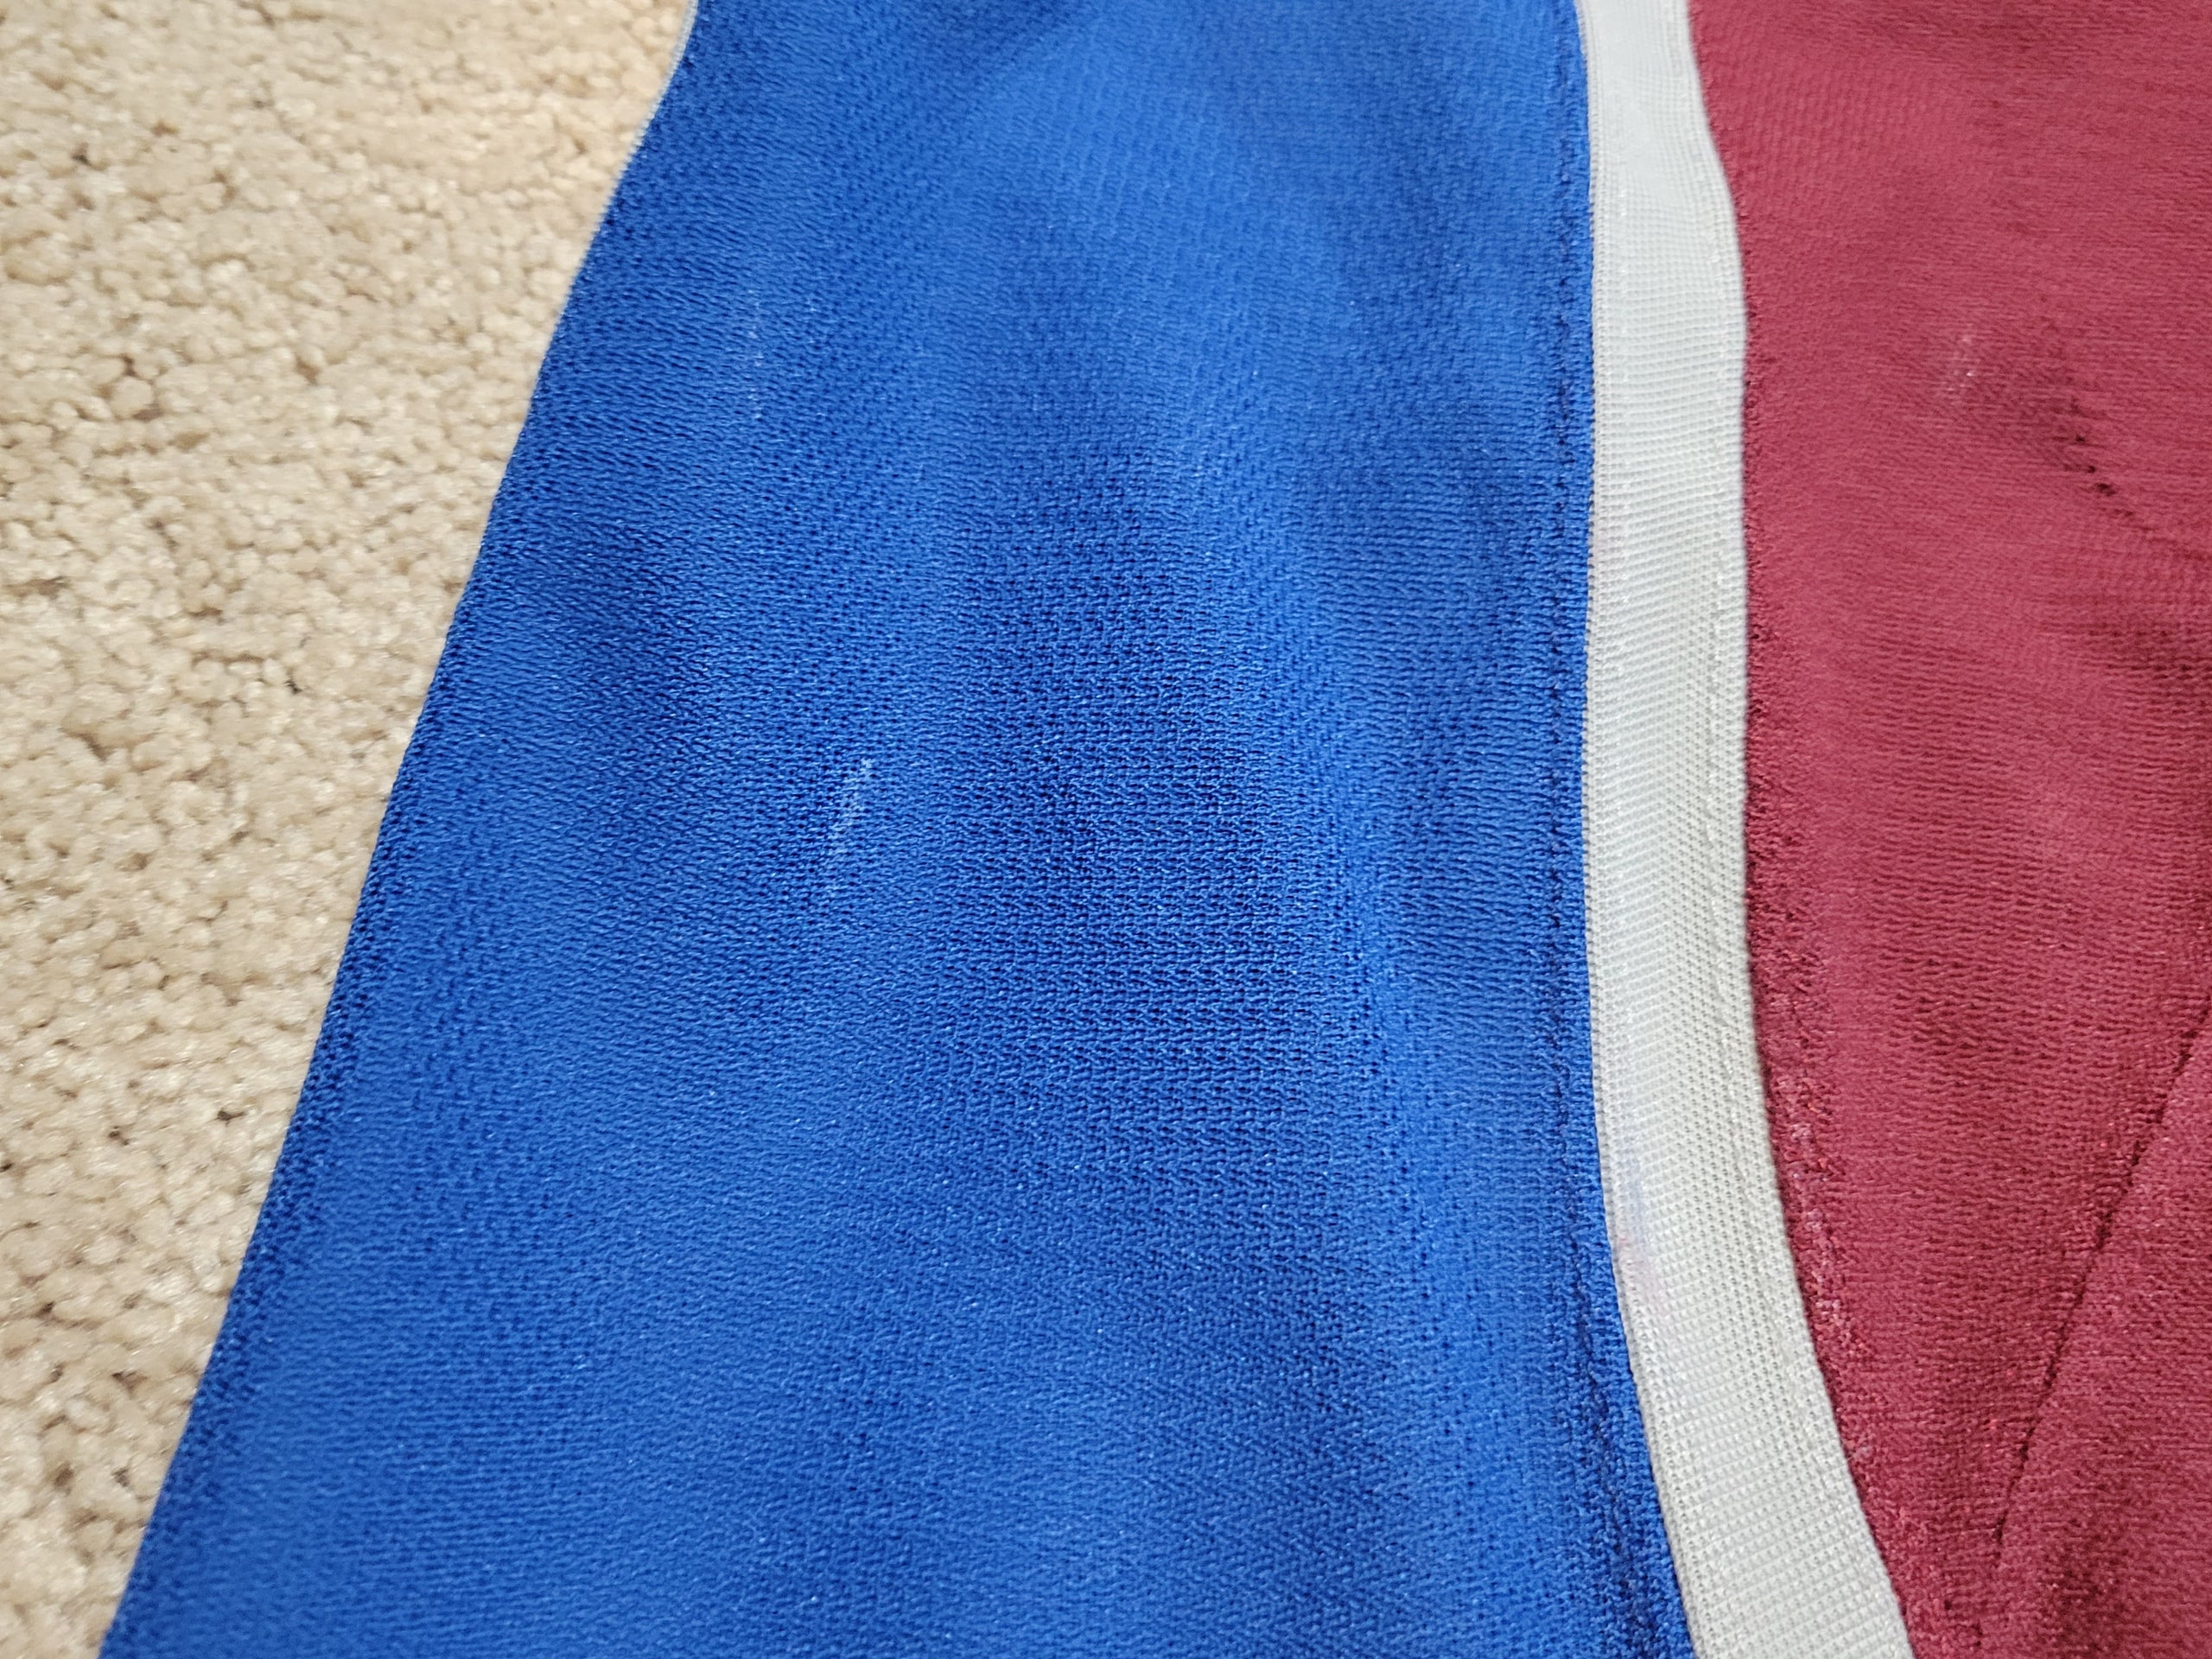 Gameworn 2nd Period Colorado Avalanche Cale Makar 2020 Stadium Series MiC  Jersey (compared to CoolHockey) - colorado avalanche post - Imgur